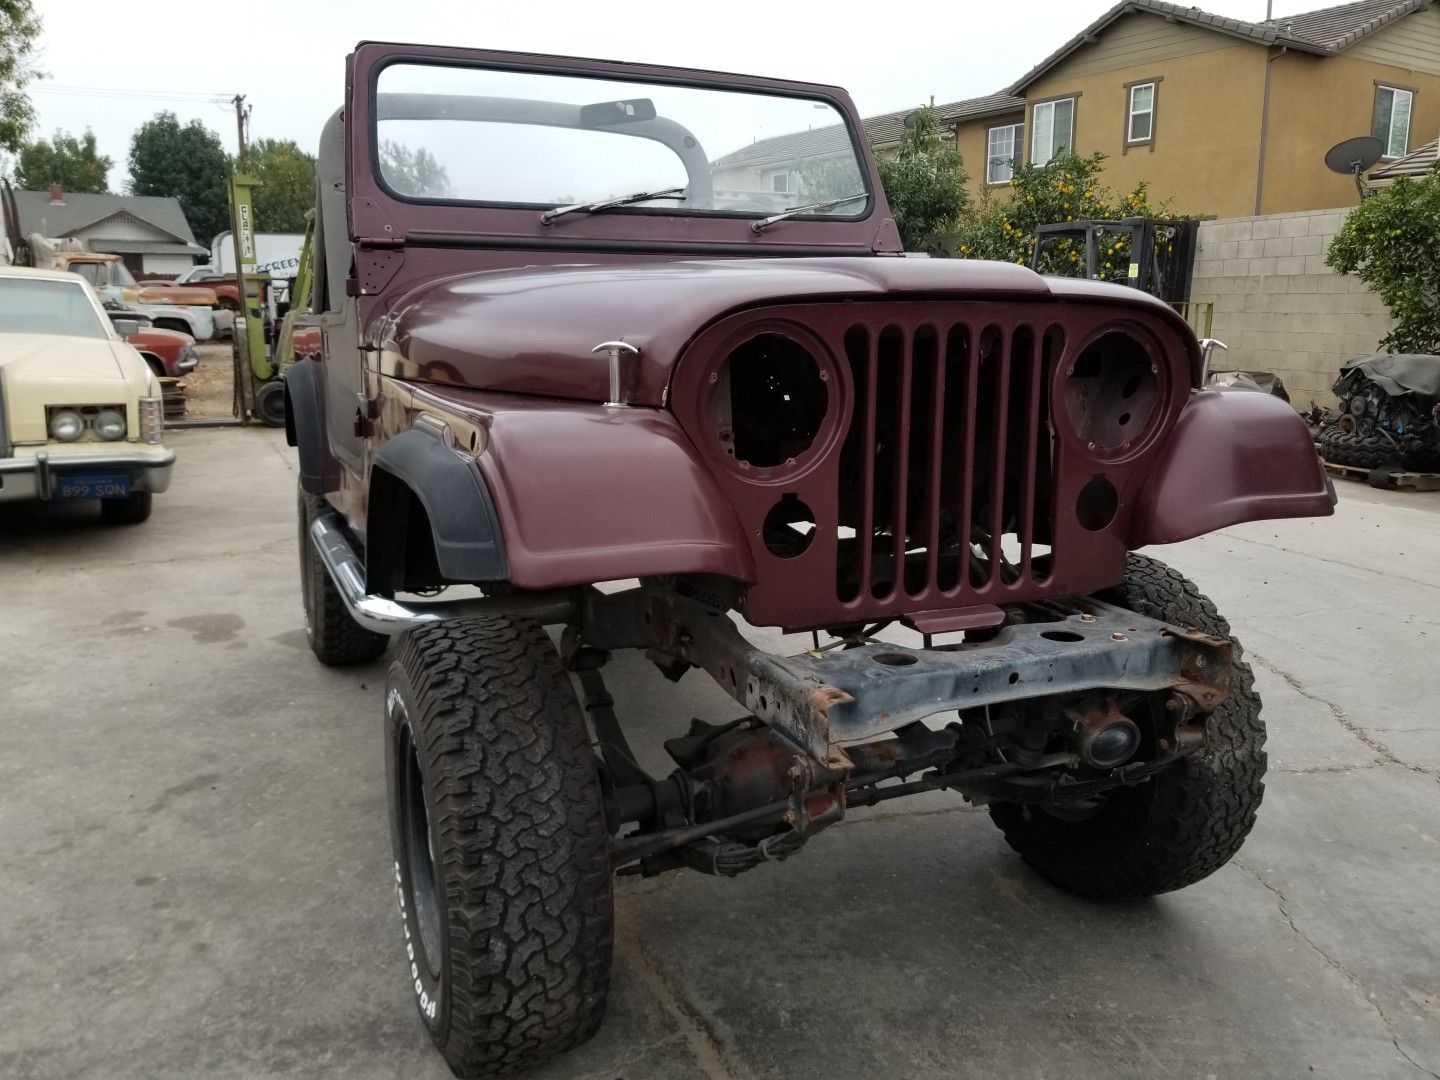 Jeep cj7 rolling body, parts project